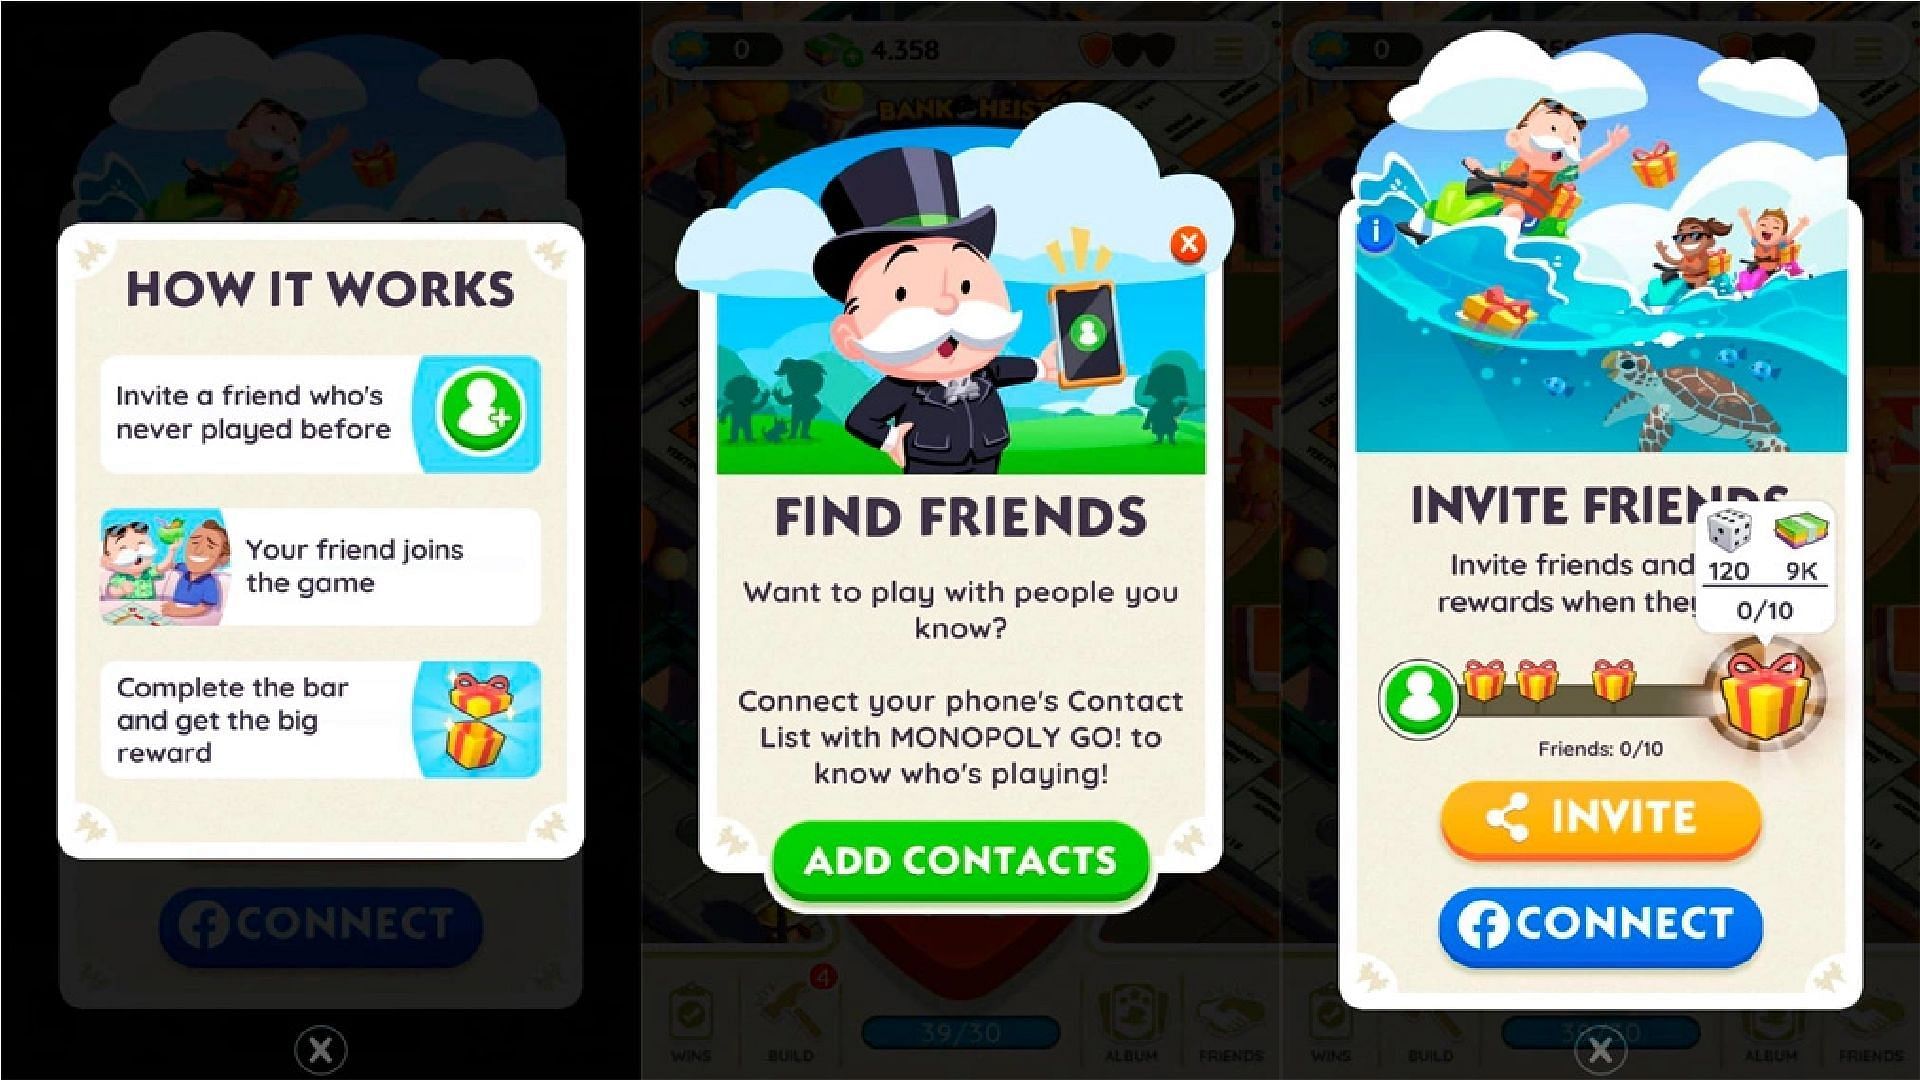 Share your invitation link to get your friends hooked on the game (Image via Scopely)